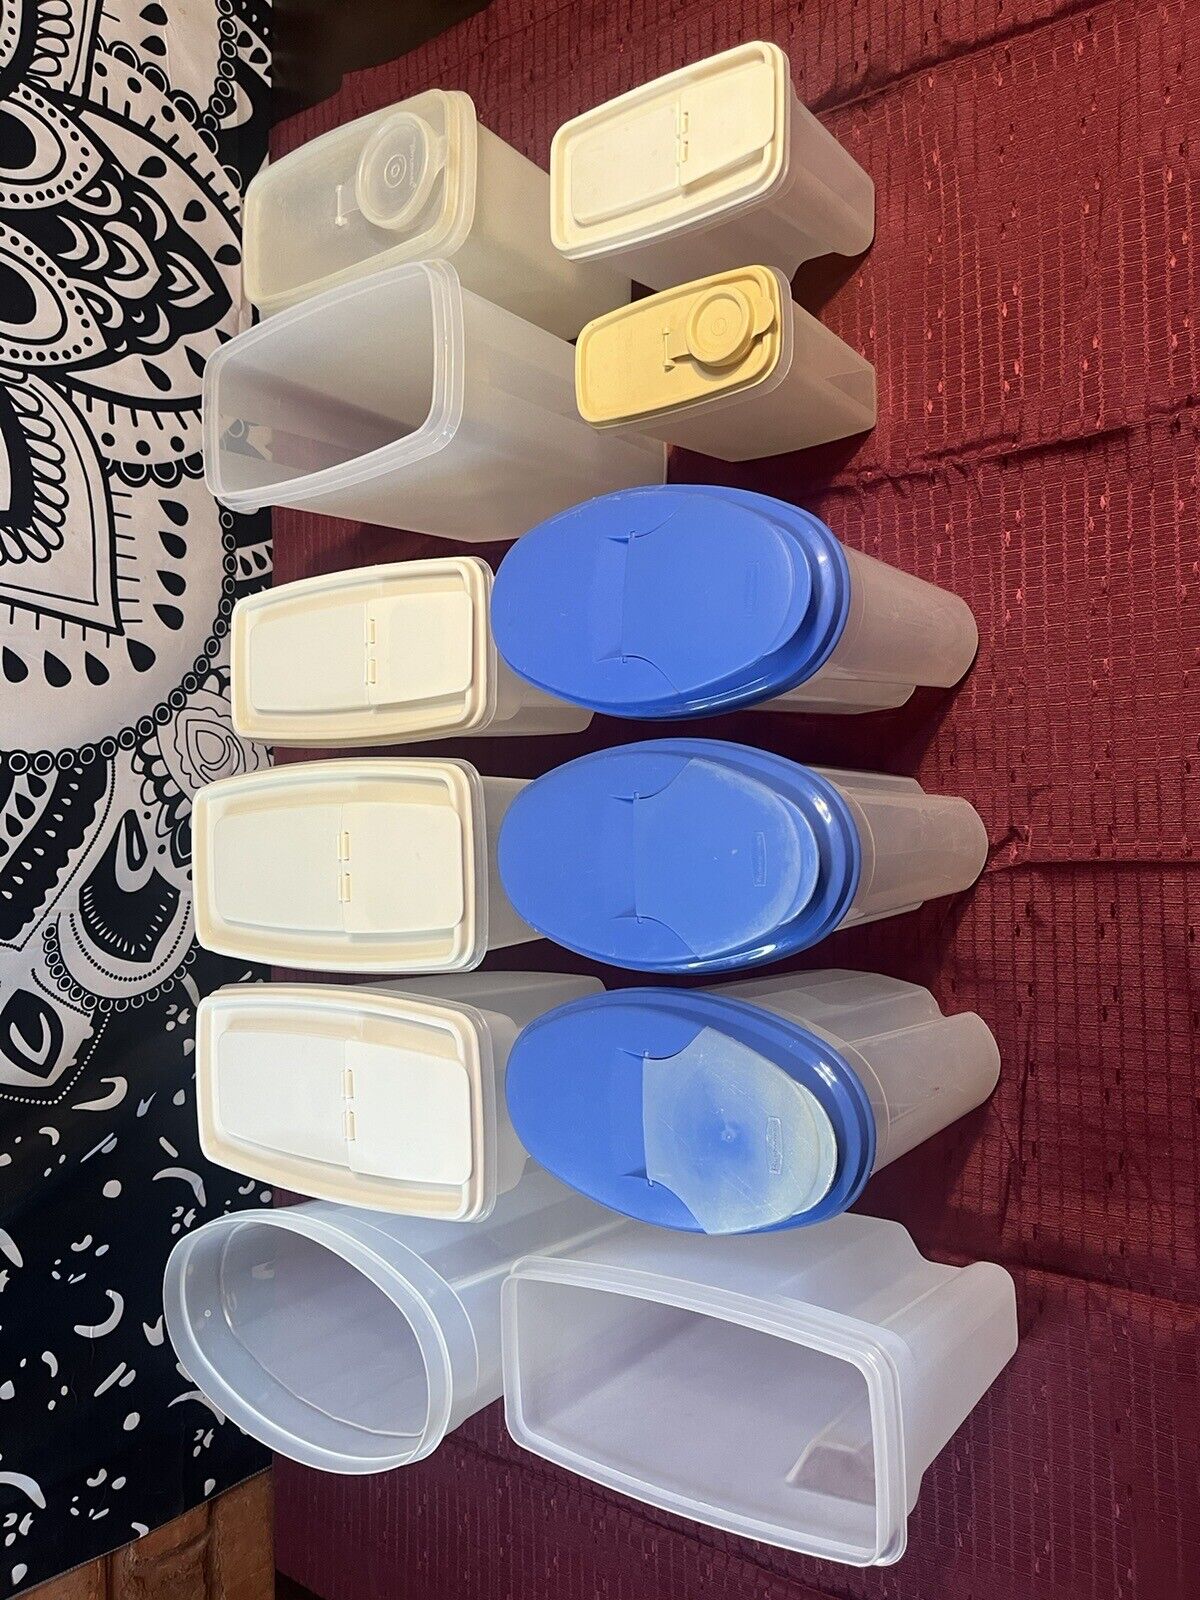 Tupperware And Rubbermaid Servin Saver Lot- 12 Total-9 With Lids-Various Sizes